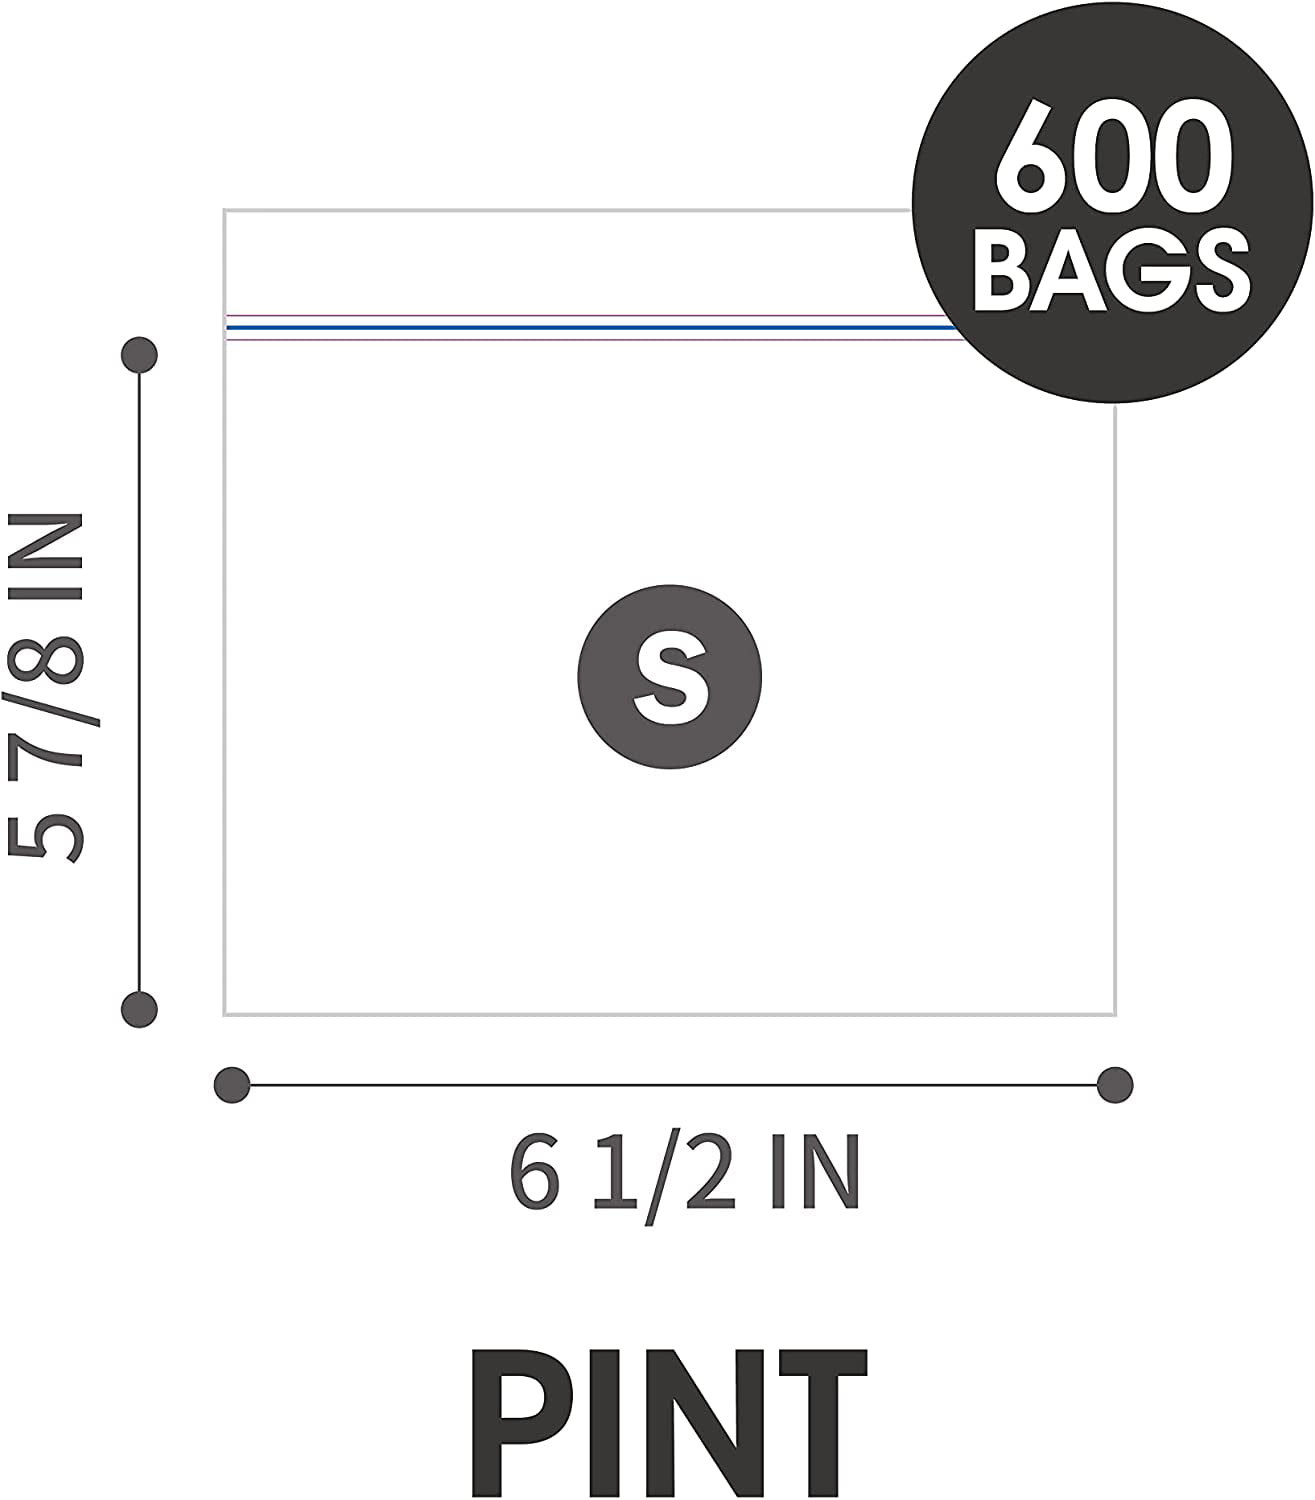 24/7 Bags | Double Zipper Seal Storage Bags, Quart size, 200 Count (4 Packs of 50) Easy Open Tabs, BPA-Free